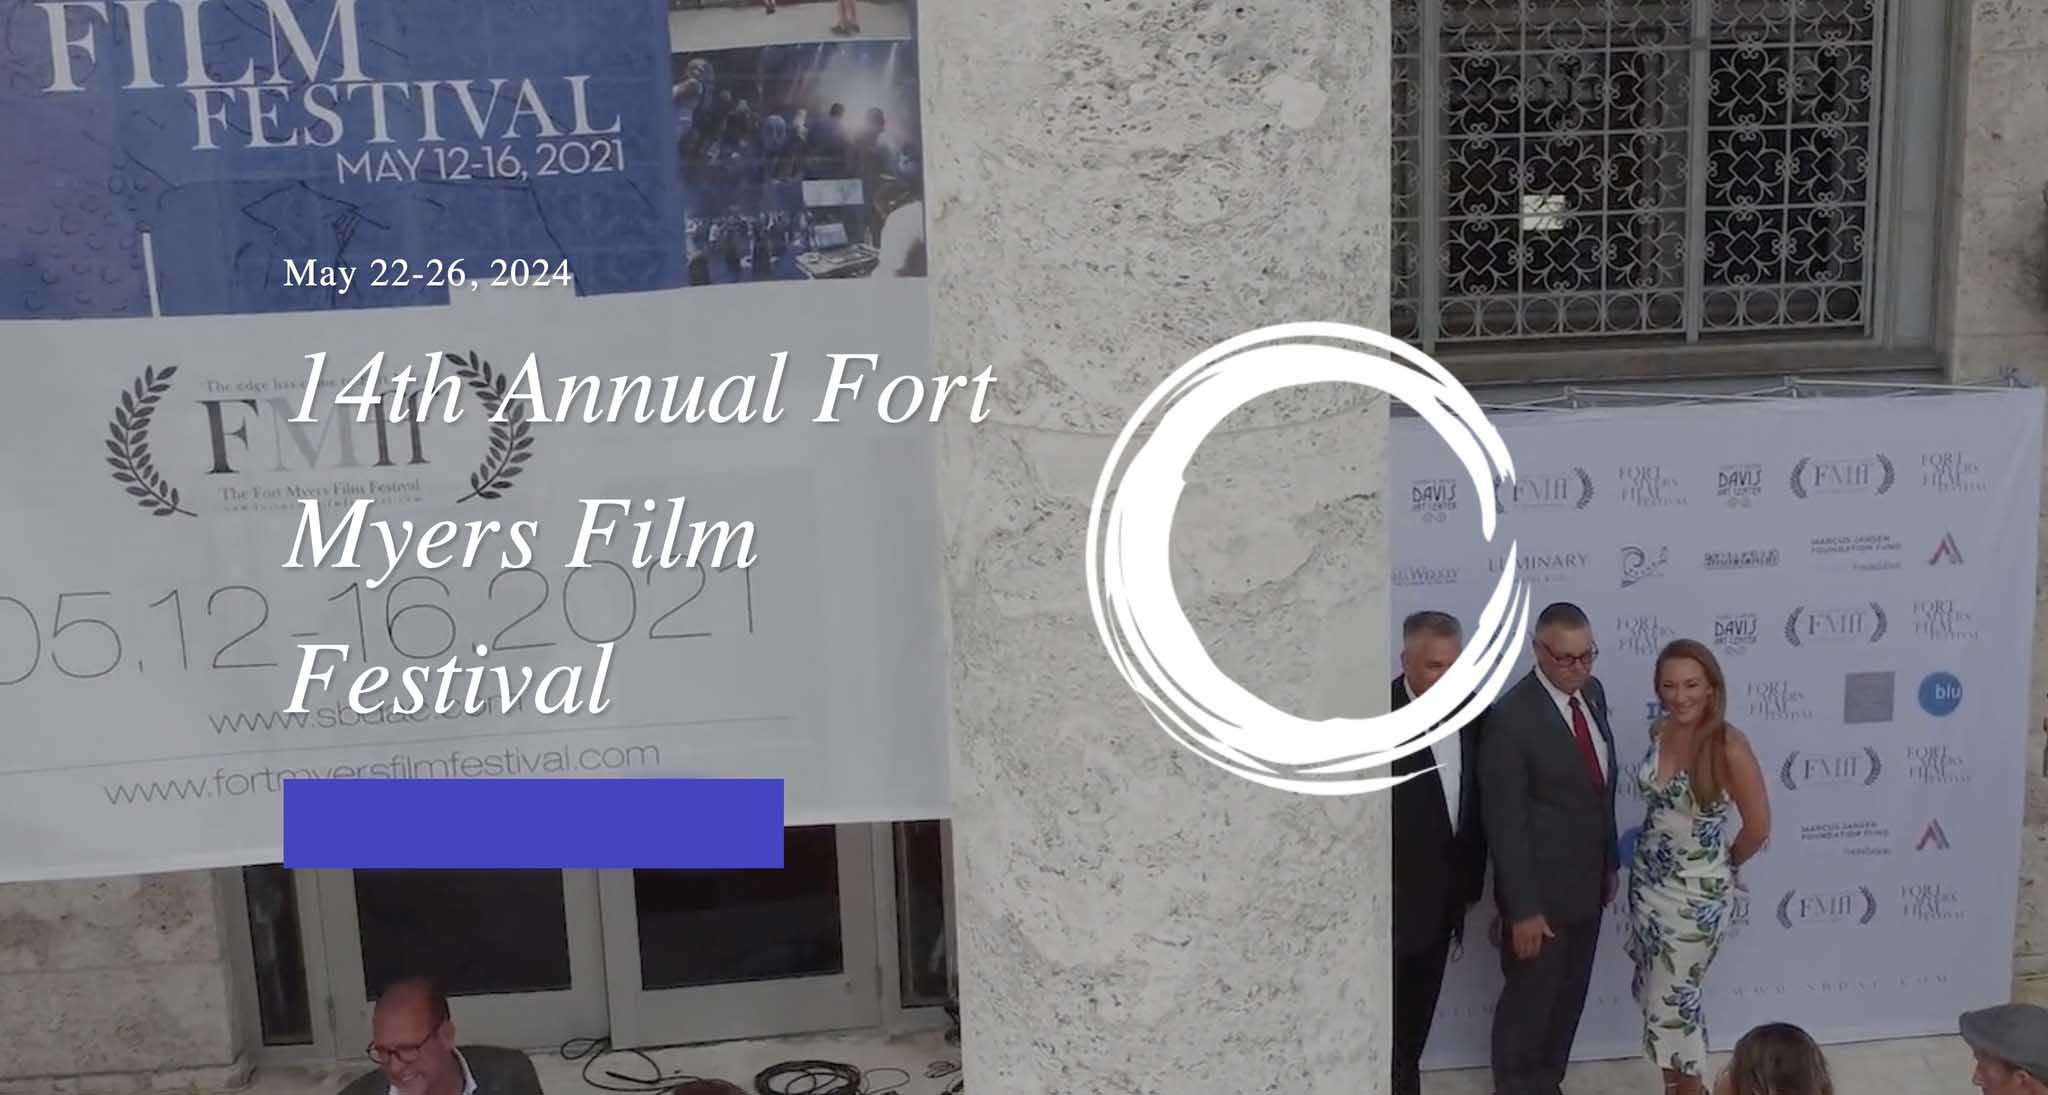 Fort Myers Film Festival promotional graphic